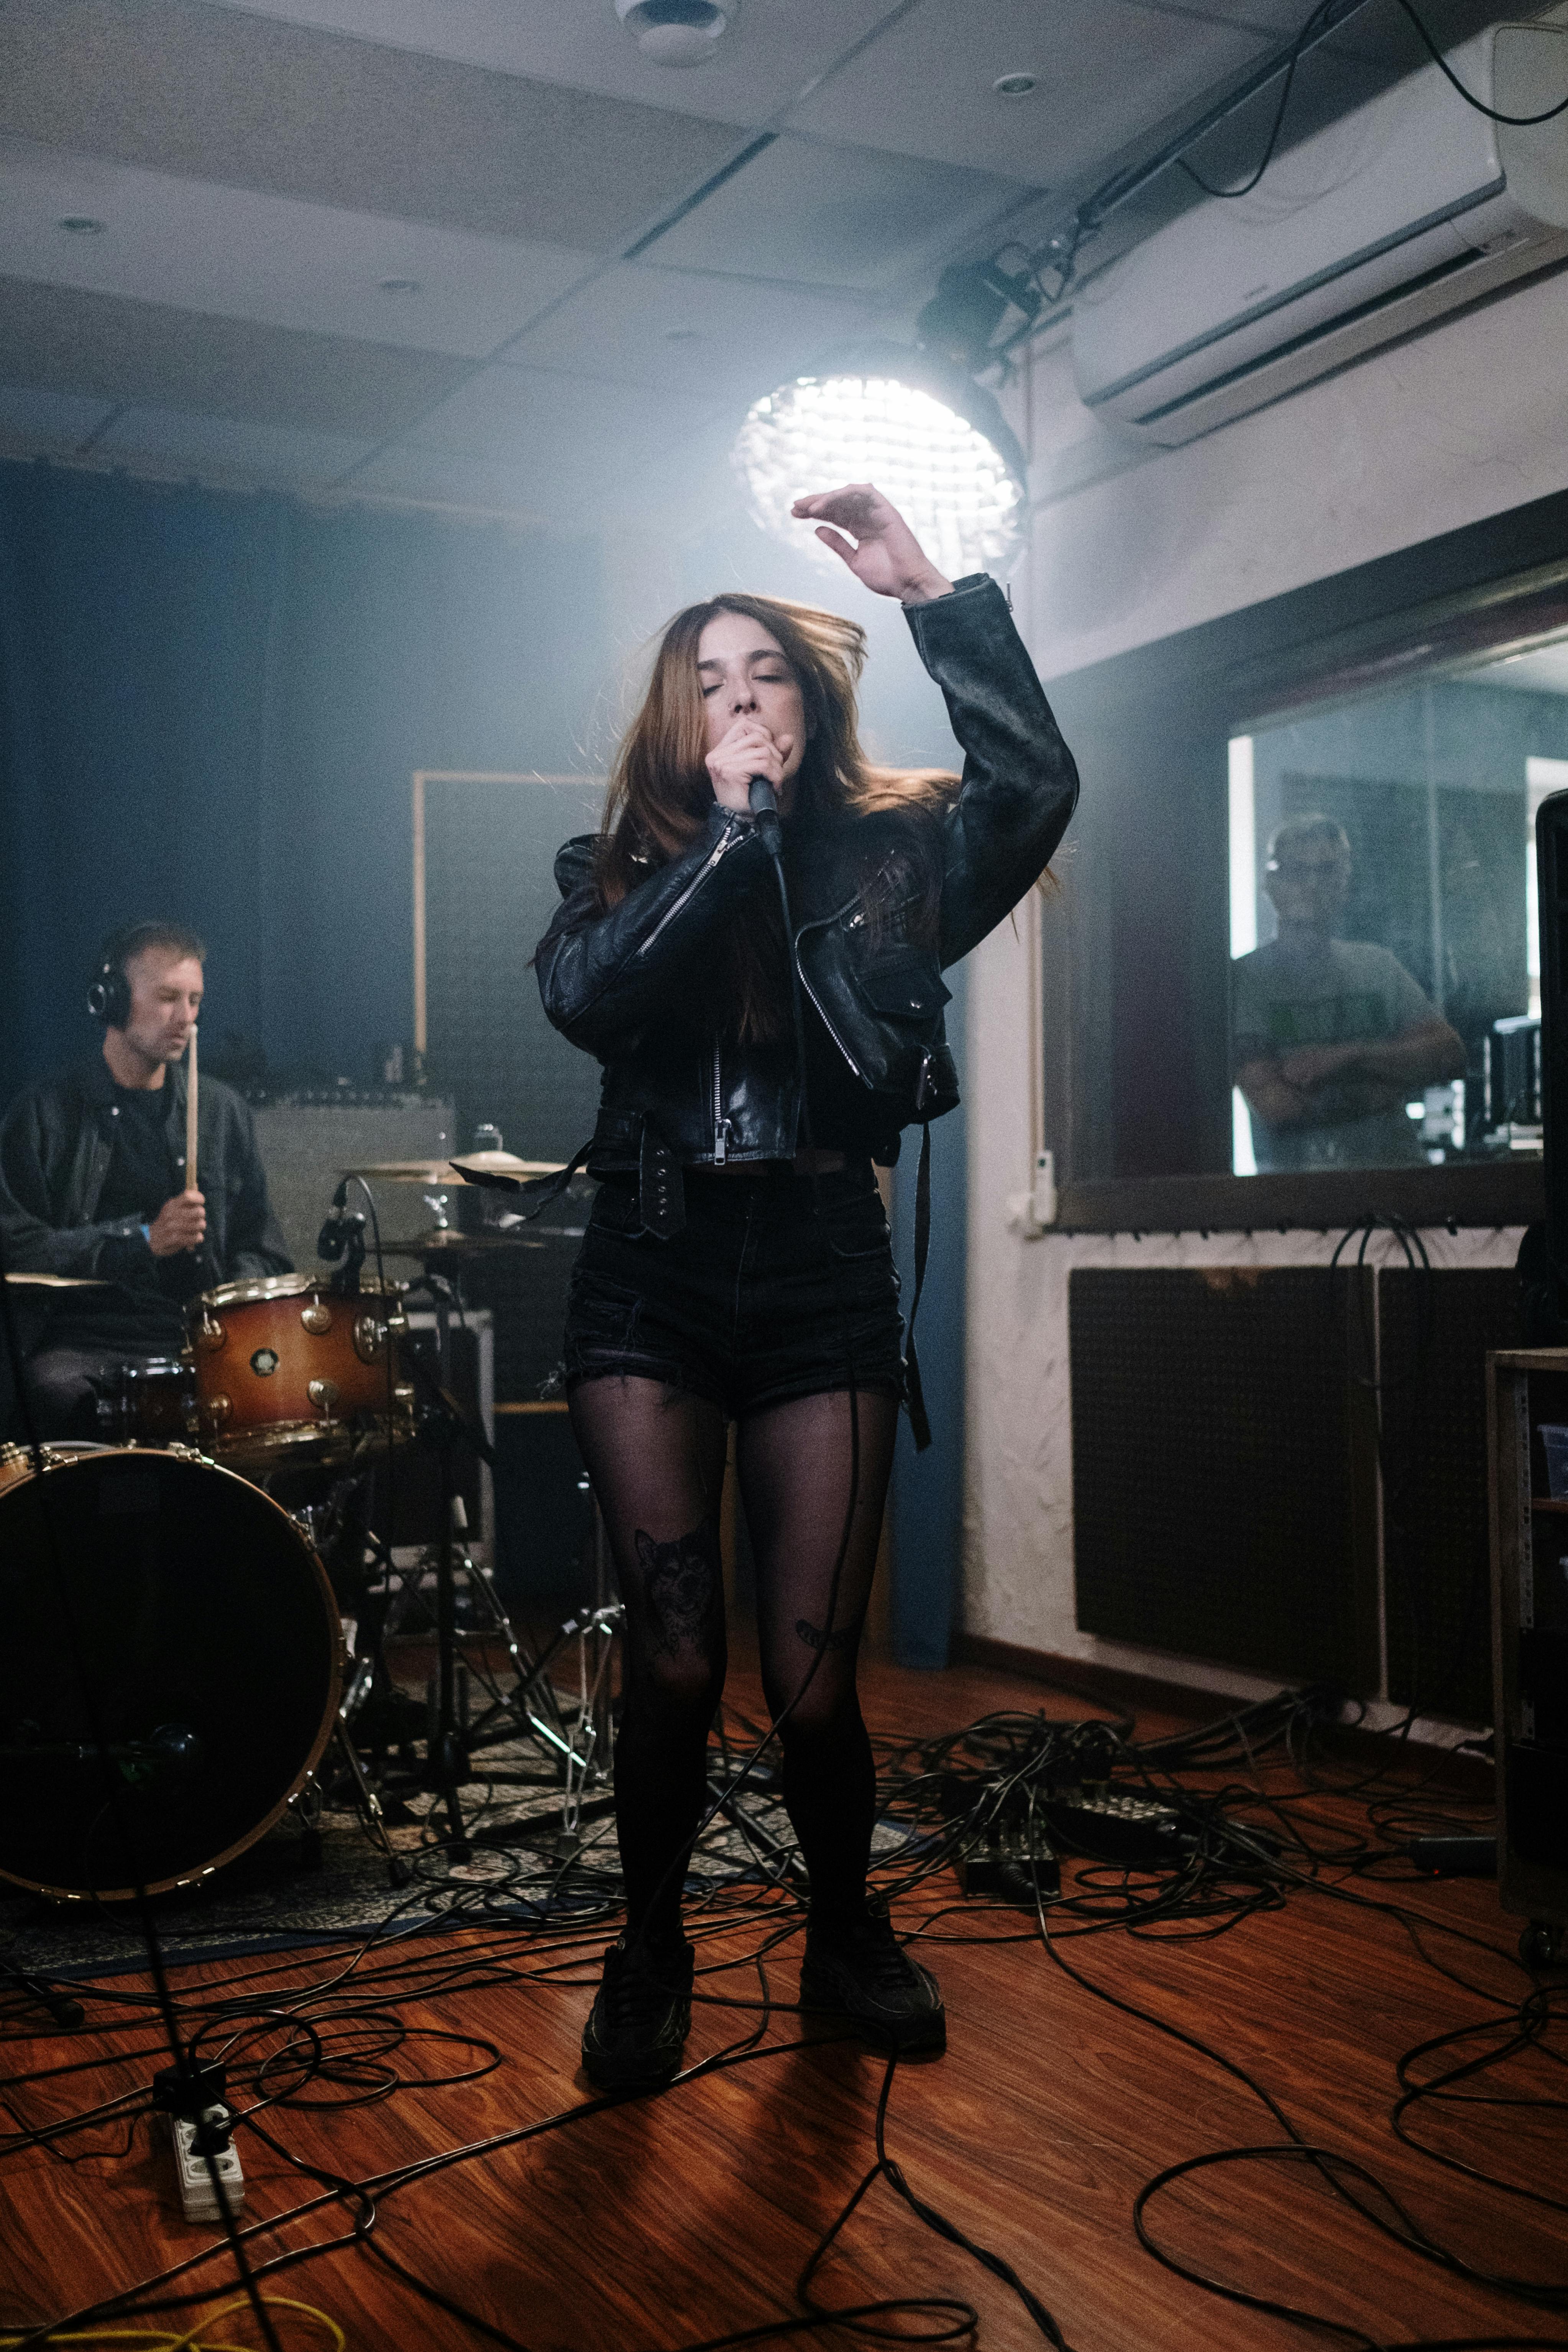 a woman singing wearing black leather jacket and black shorts